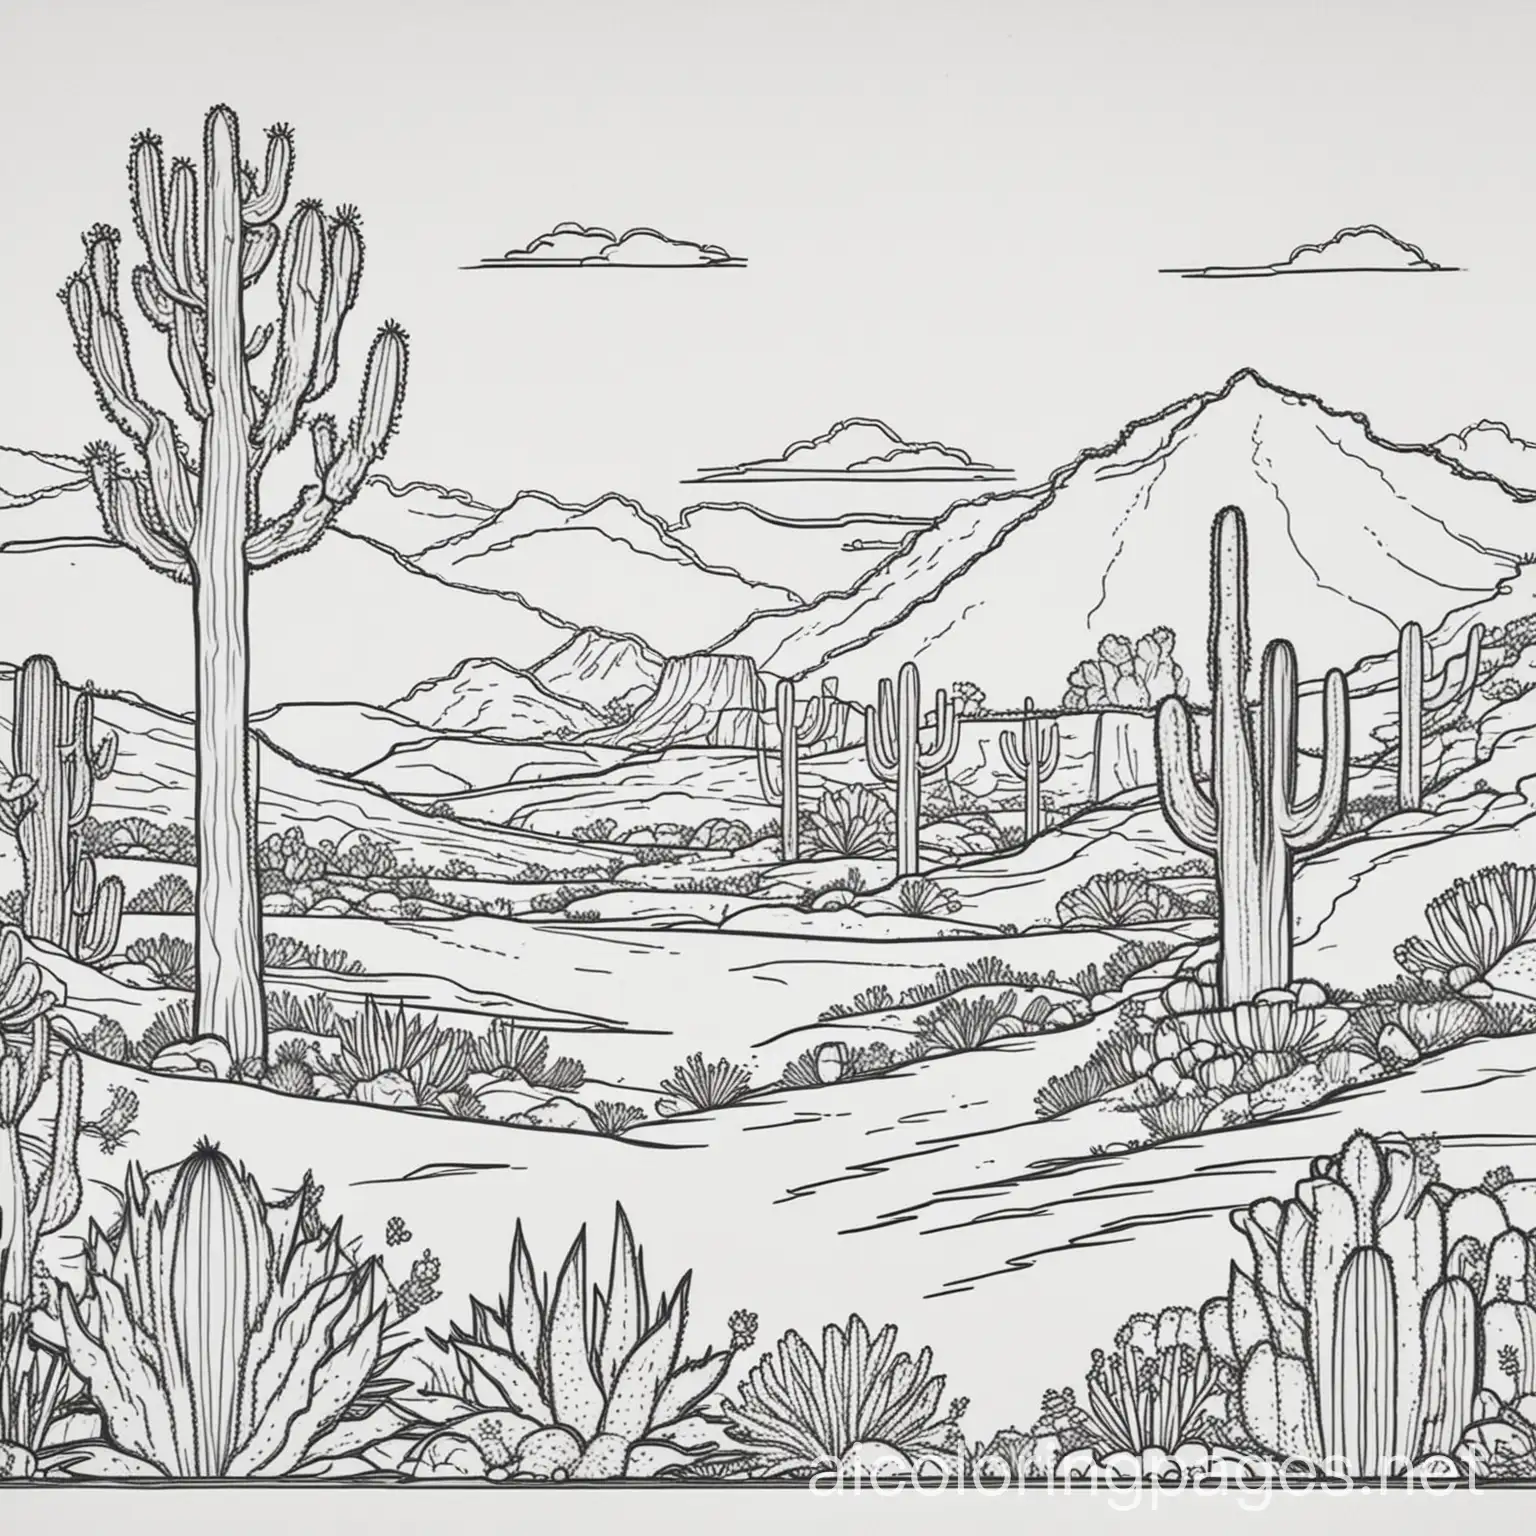 desert habitat coloring page, Coloring Page, black and white, line art, white background, Simplicity, Ample White Space. The background of the coloring page is plain white to make it easy for young children to color within the lines. The outlines of all the subjects are easy to distinguish, making it simple for kids to color without too much difficulty